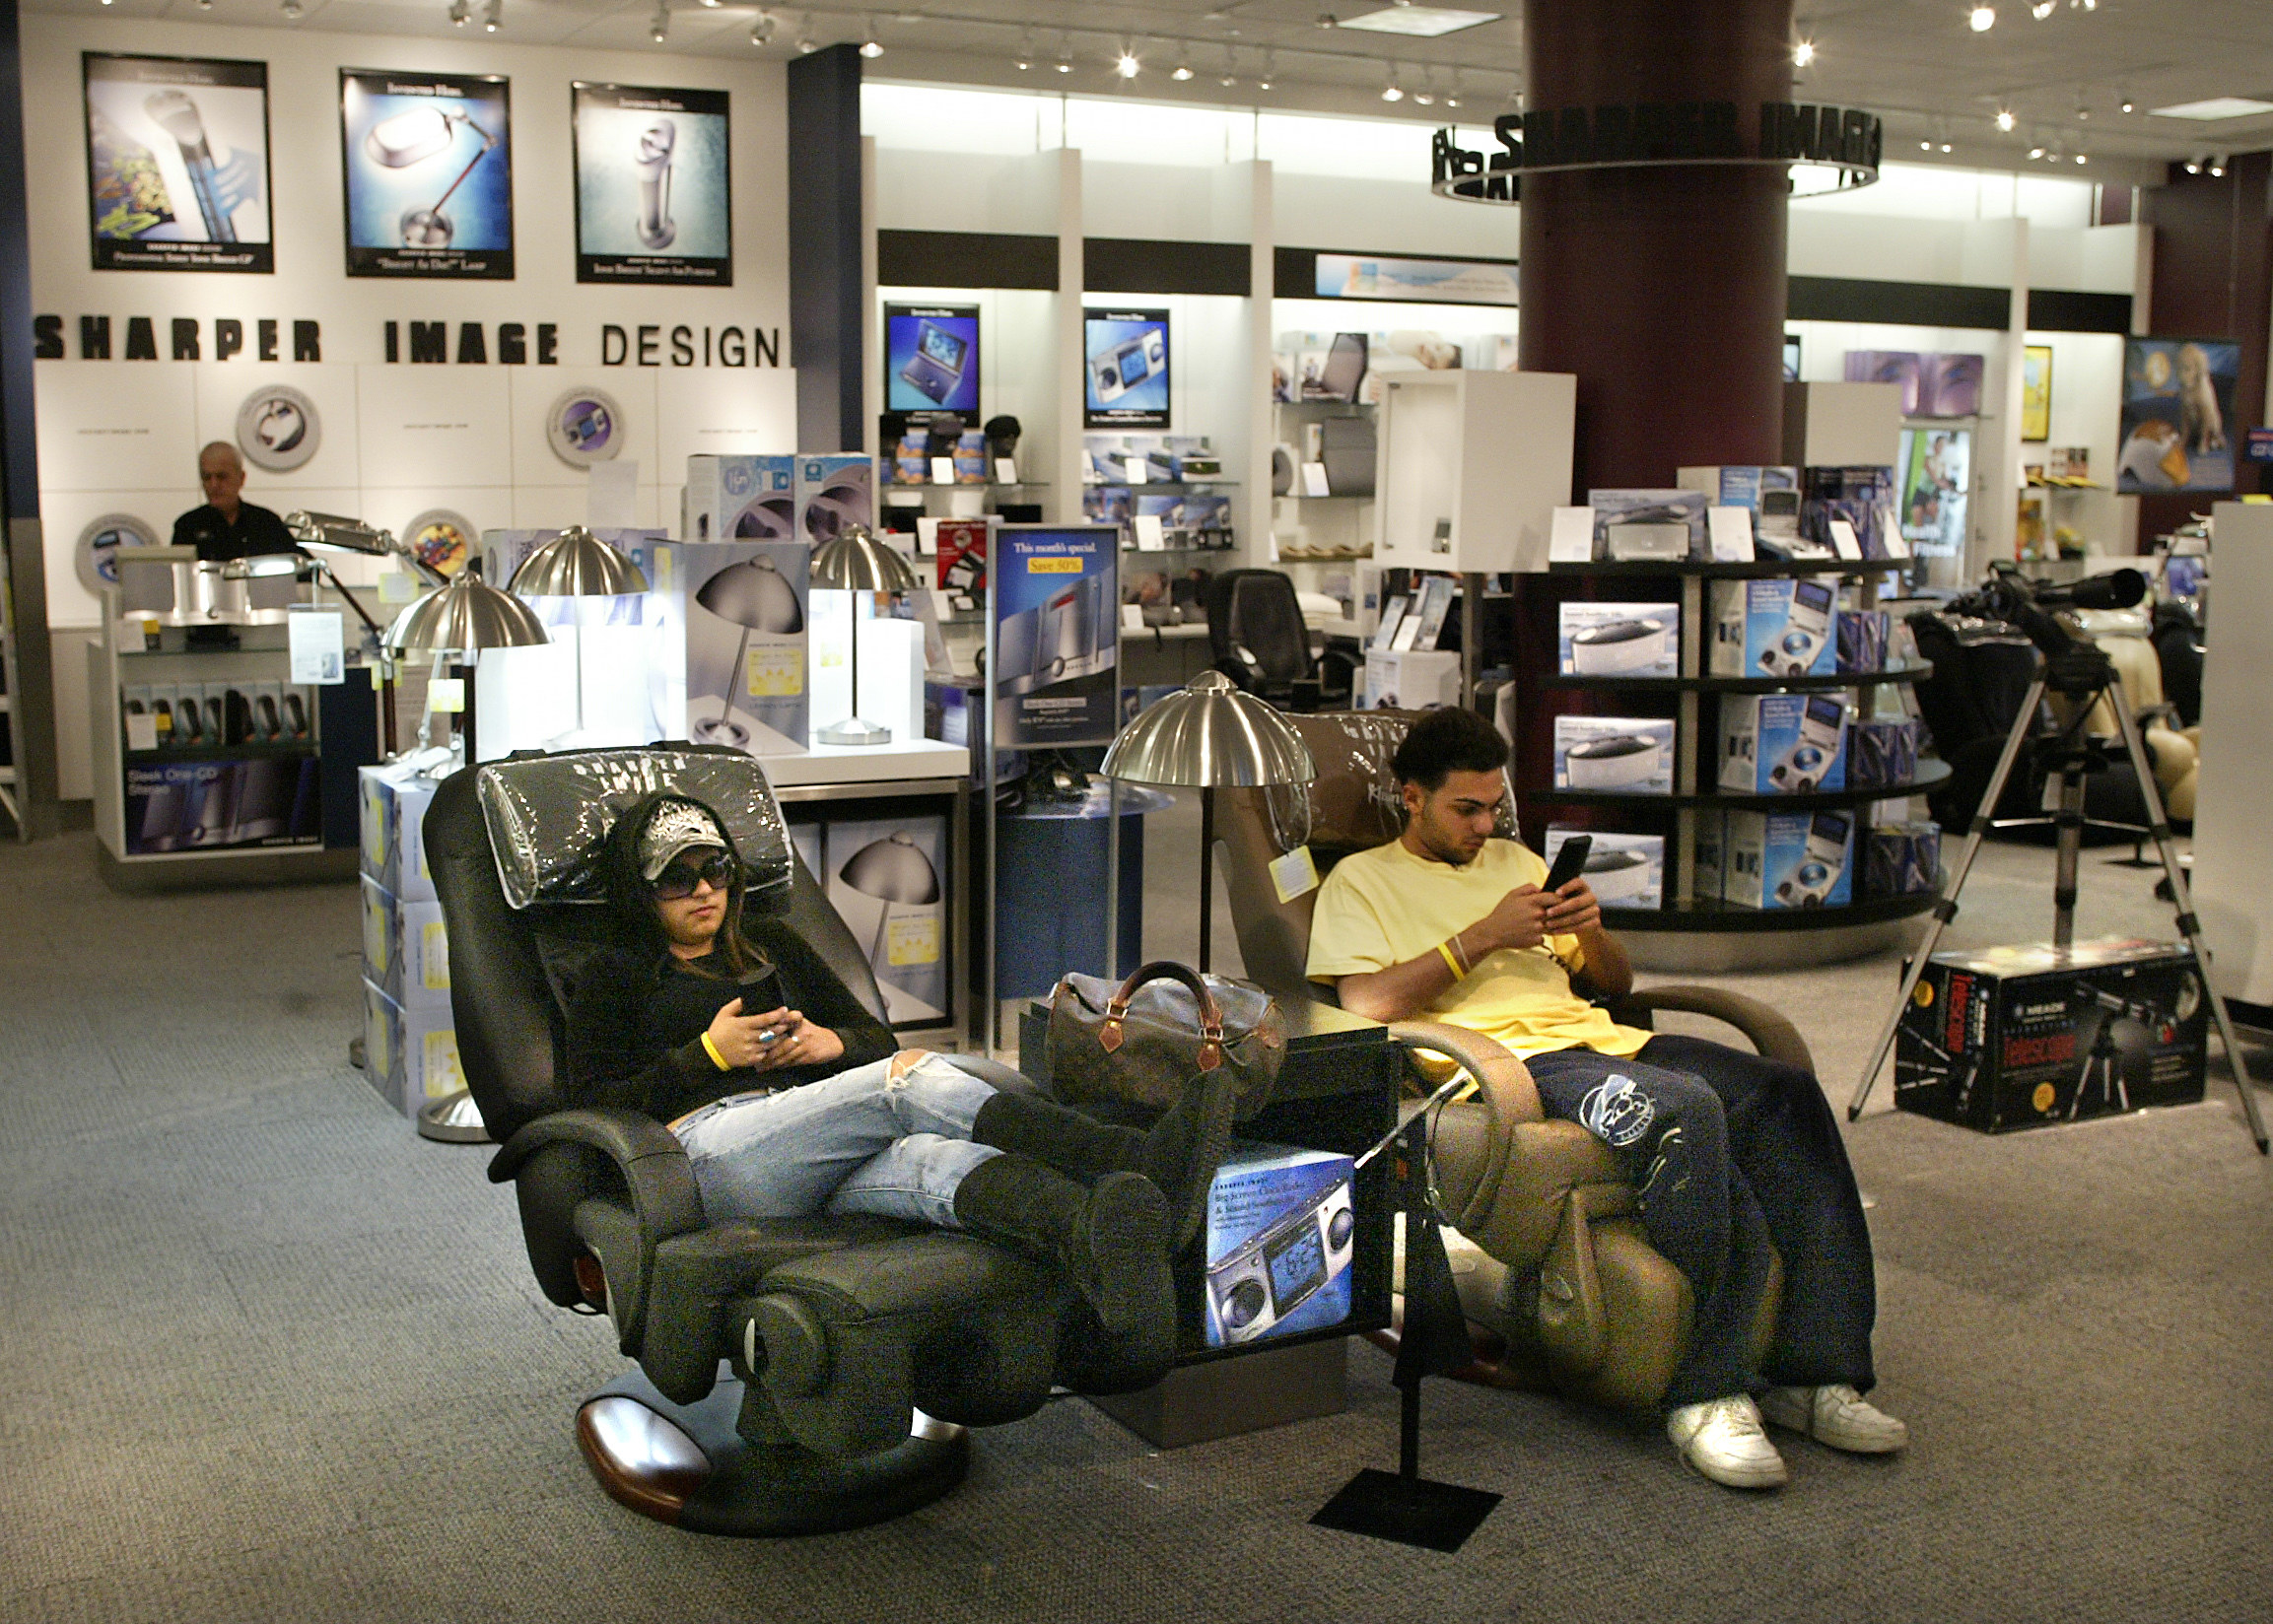 Two teens sitting in massage chairs inside a Sharper Image